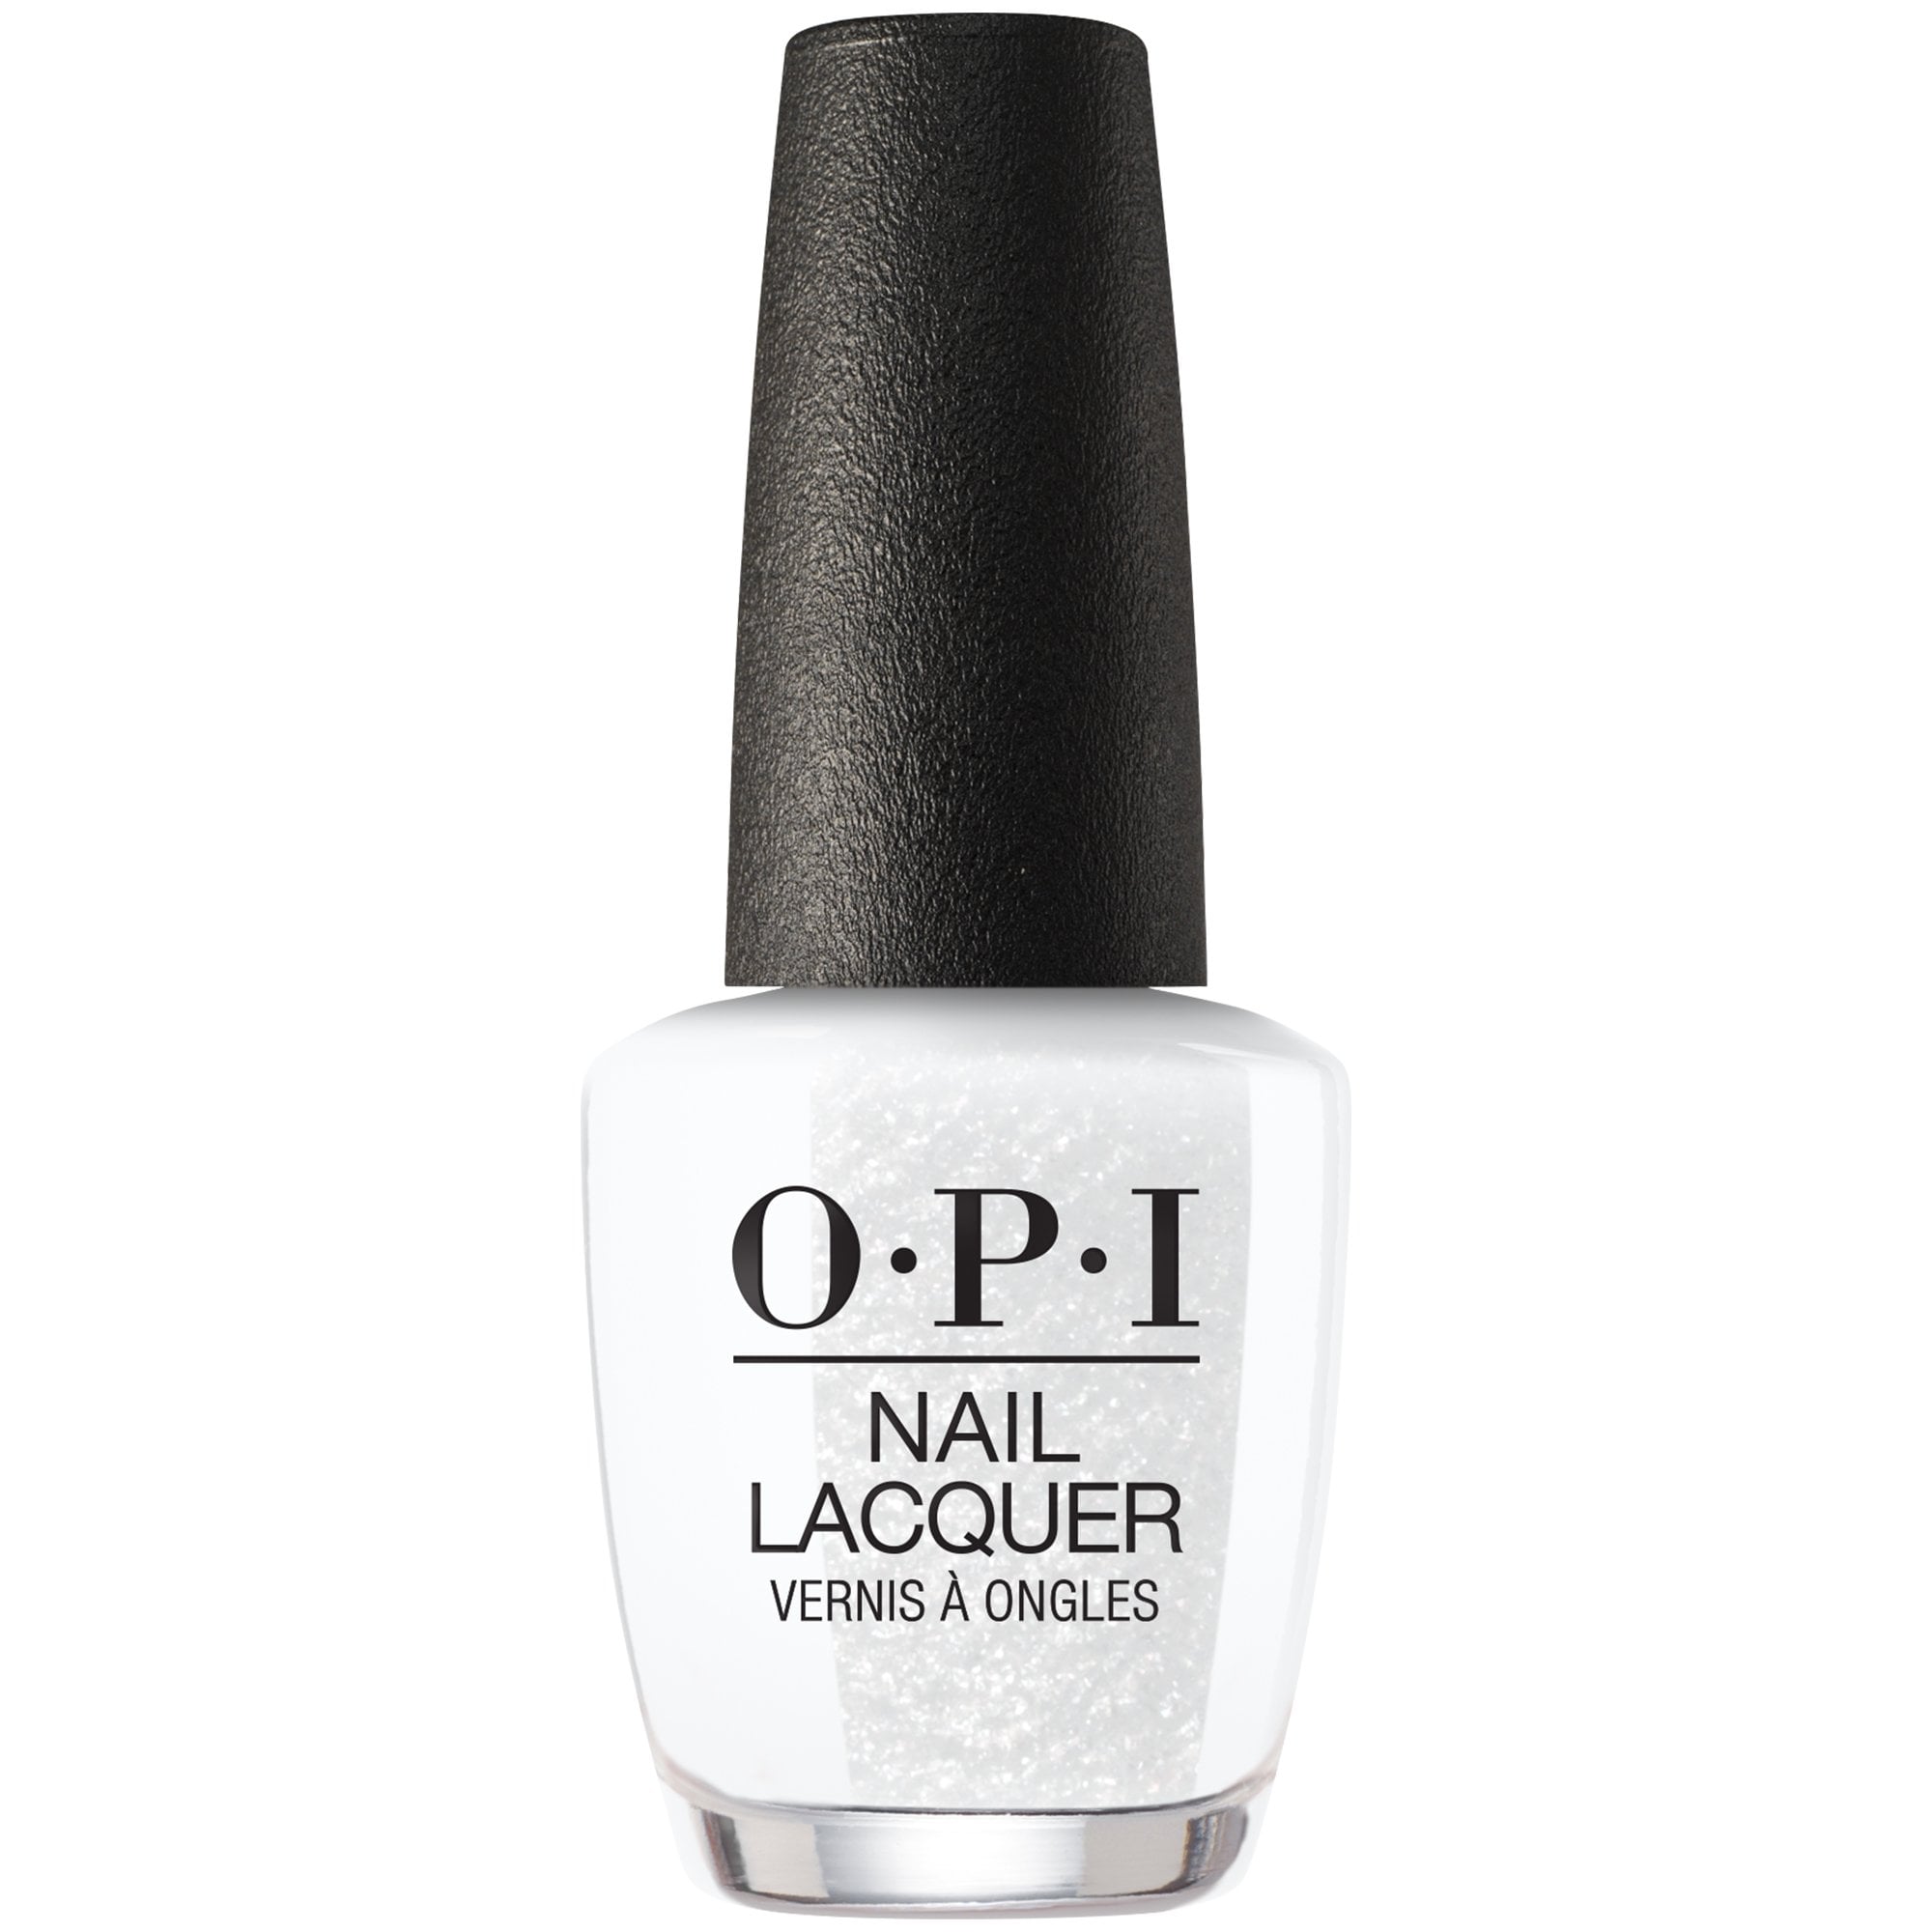 OPI Nutcracker Dancing Keeps Me on My Toes nail polish BeautyandHairdressing